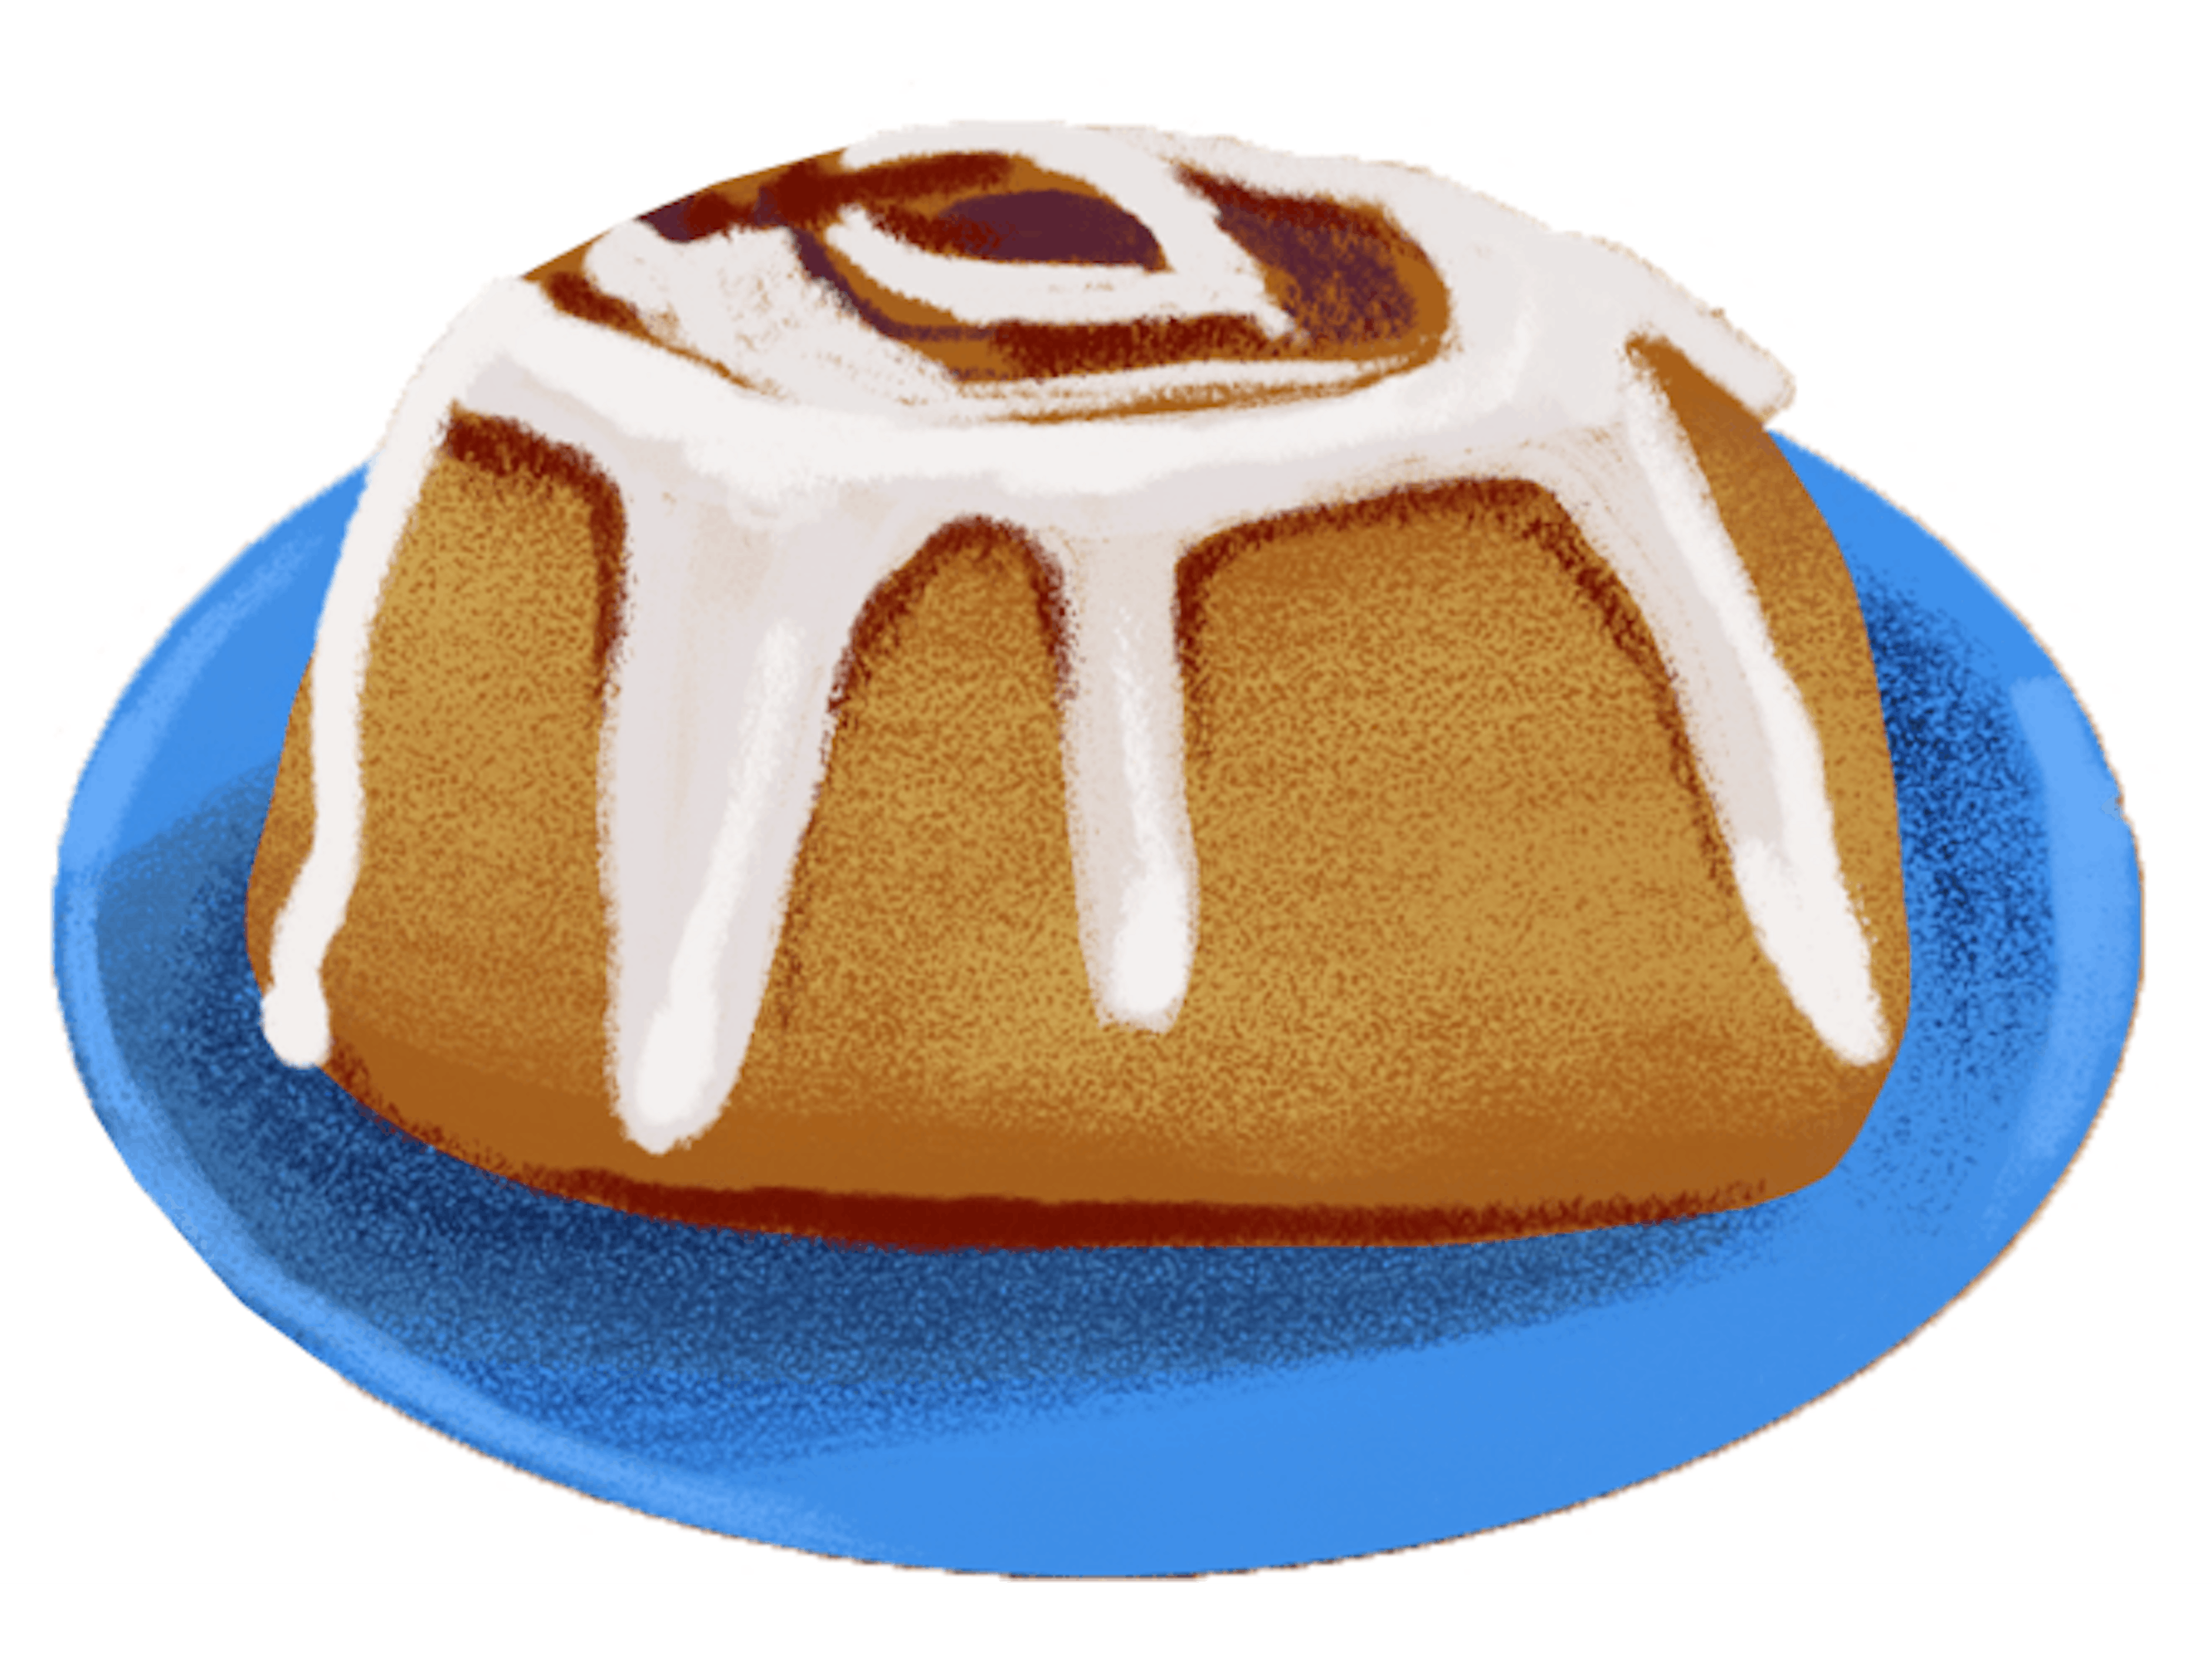 Cinnamon bun from Ann Sather sits on a bright blue plate. The pastry is a delicious brown color, and drips with white icing.